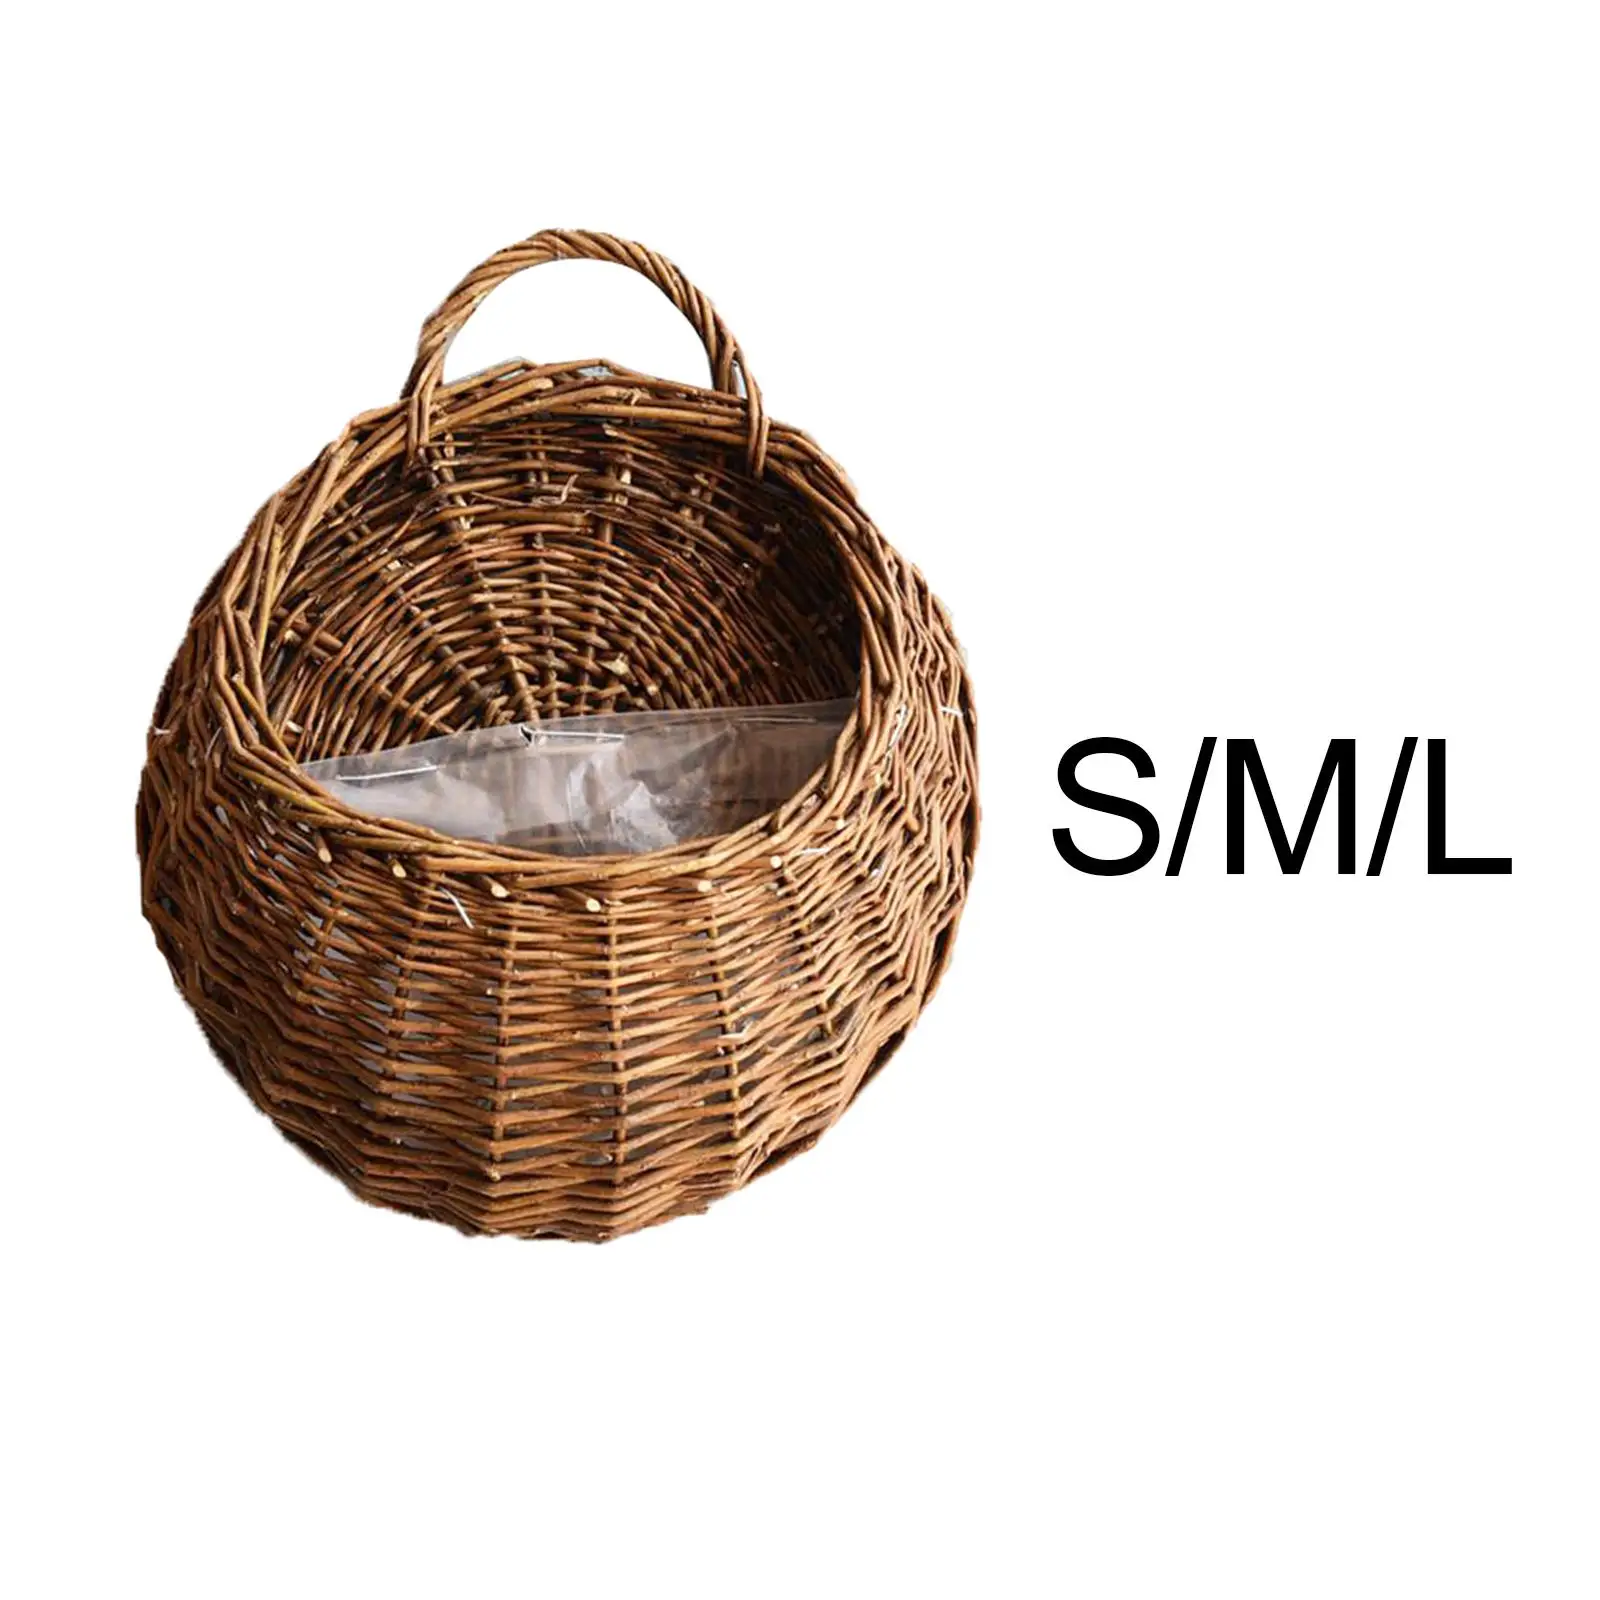 Woven Flower Basket Rustic Laundry Basket Round Crafts for Patio Wedding